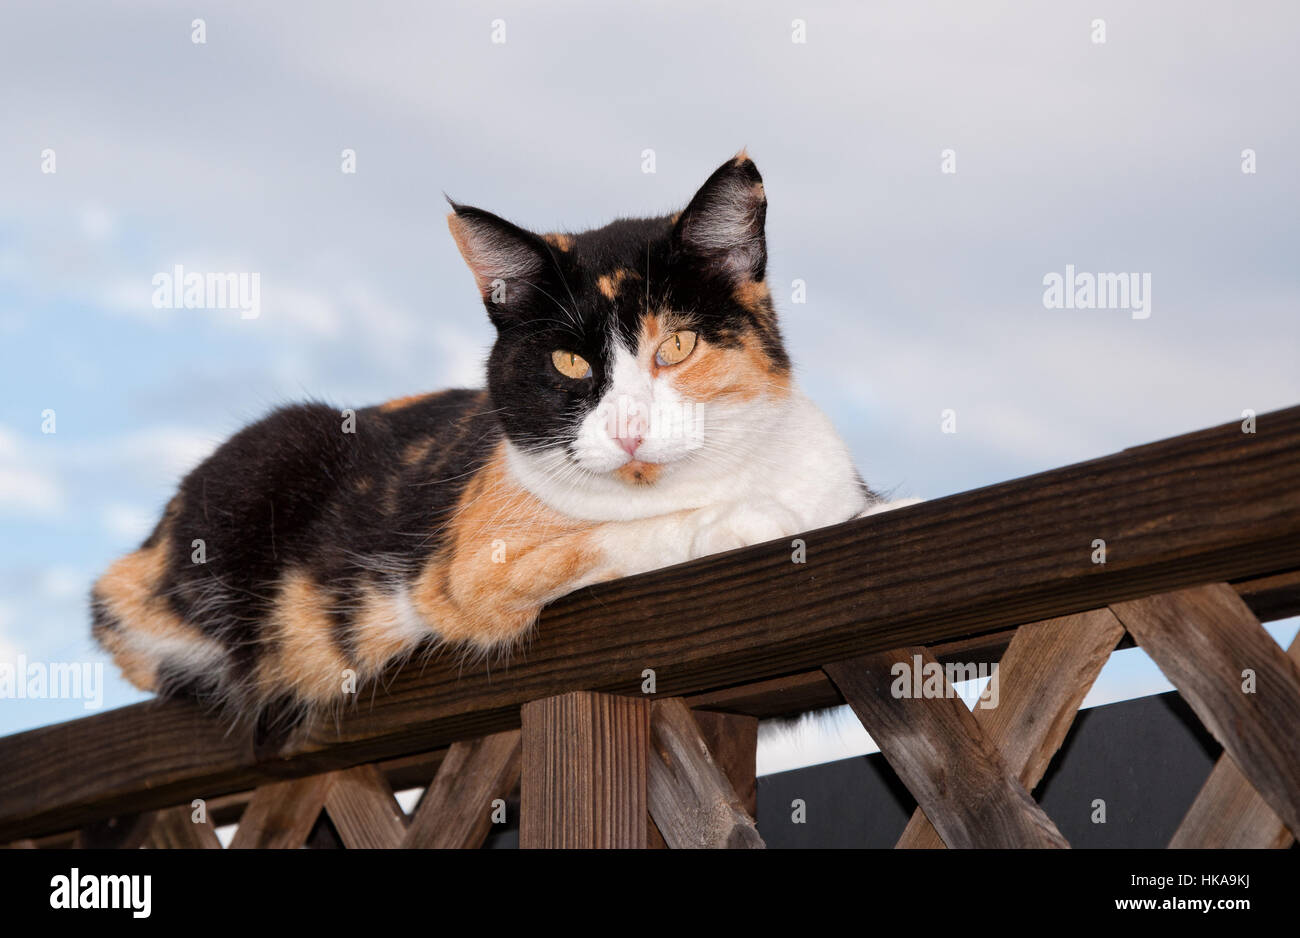 Calico cat resting on top of wooden railing, looking at the viewer Stock Photo